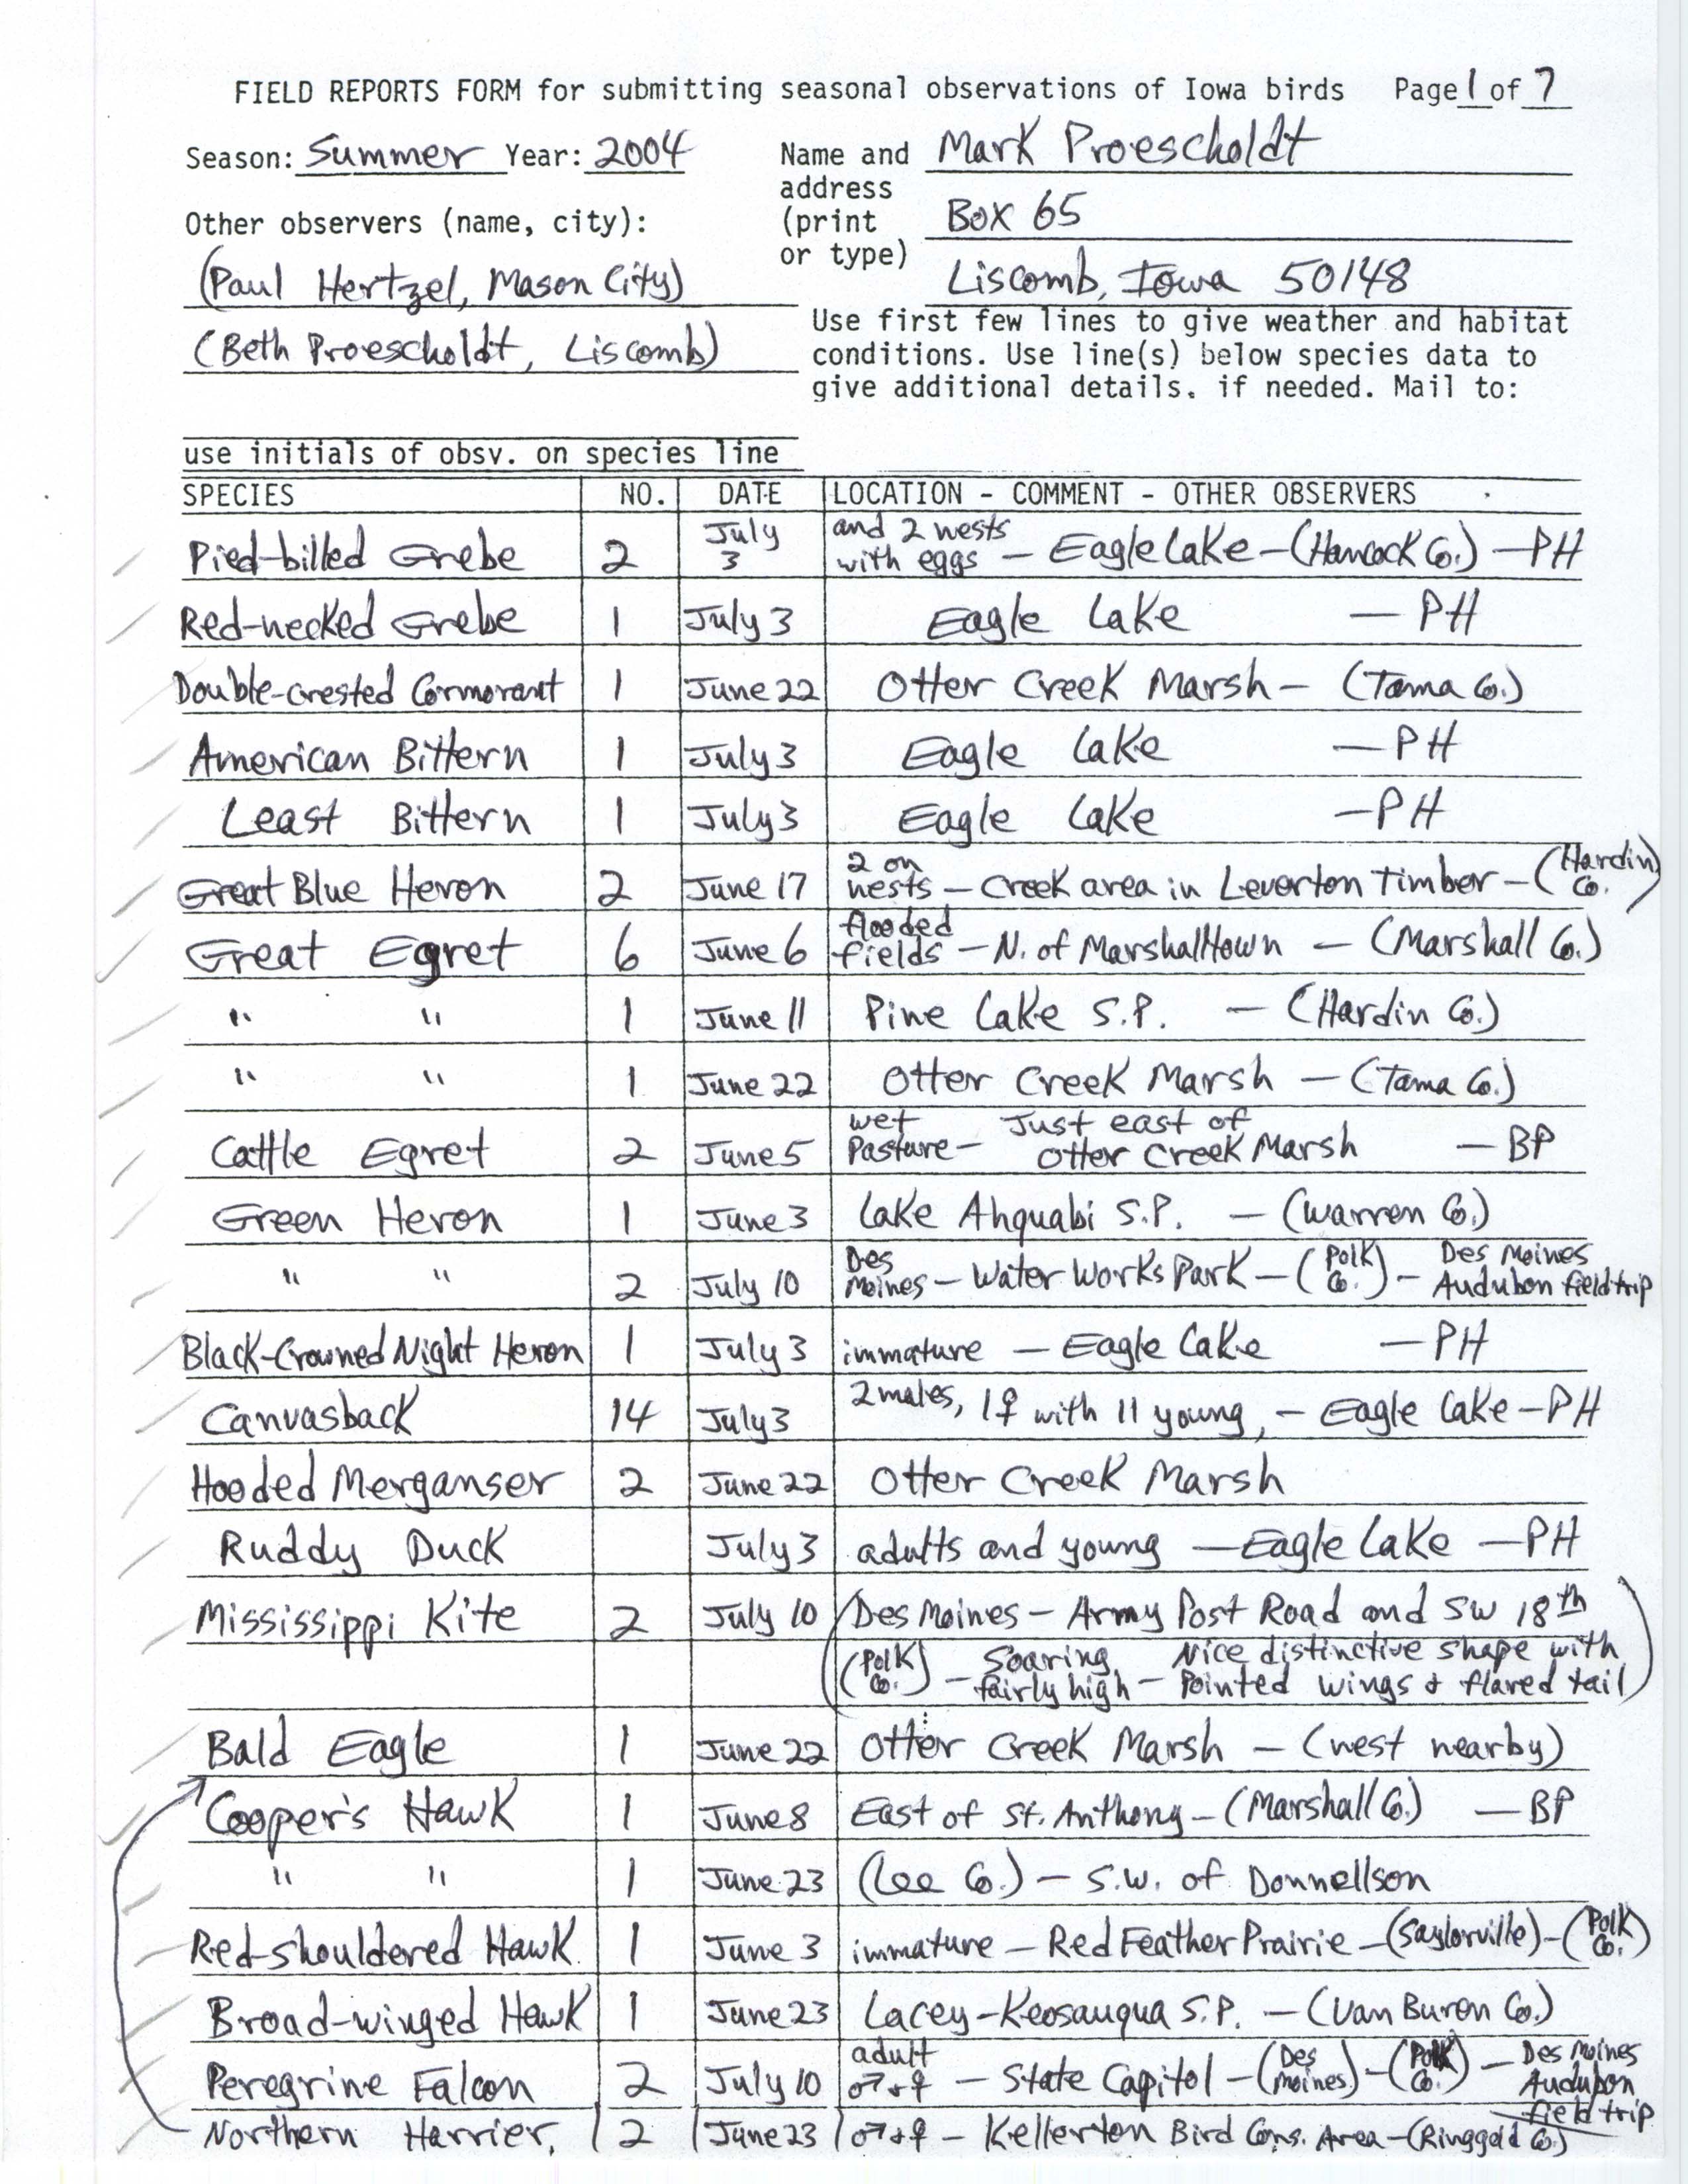 Field reports form for submitting seasonal observations of Iowa birds, Mark Proescholdt, summer 2004